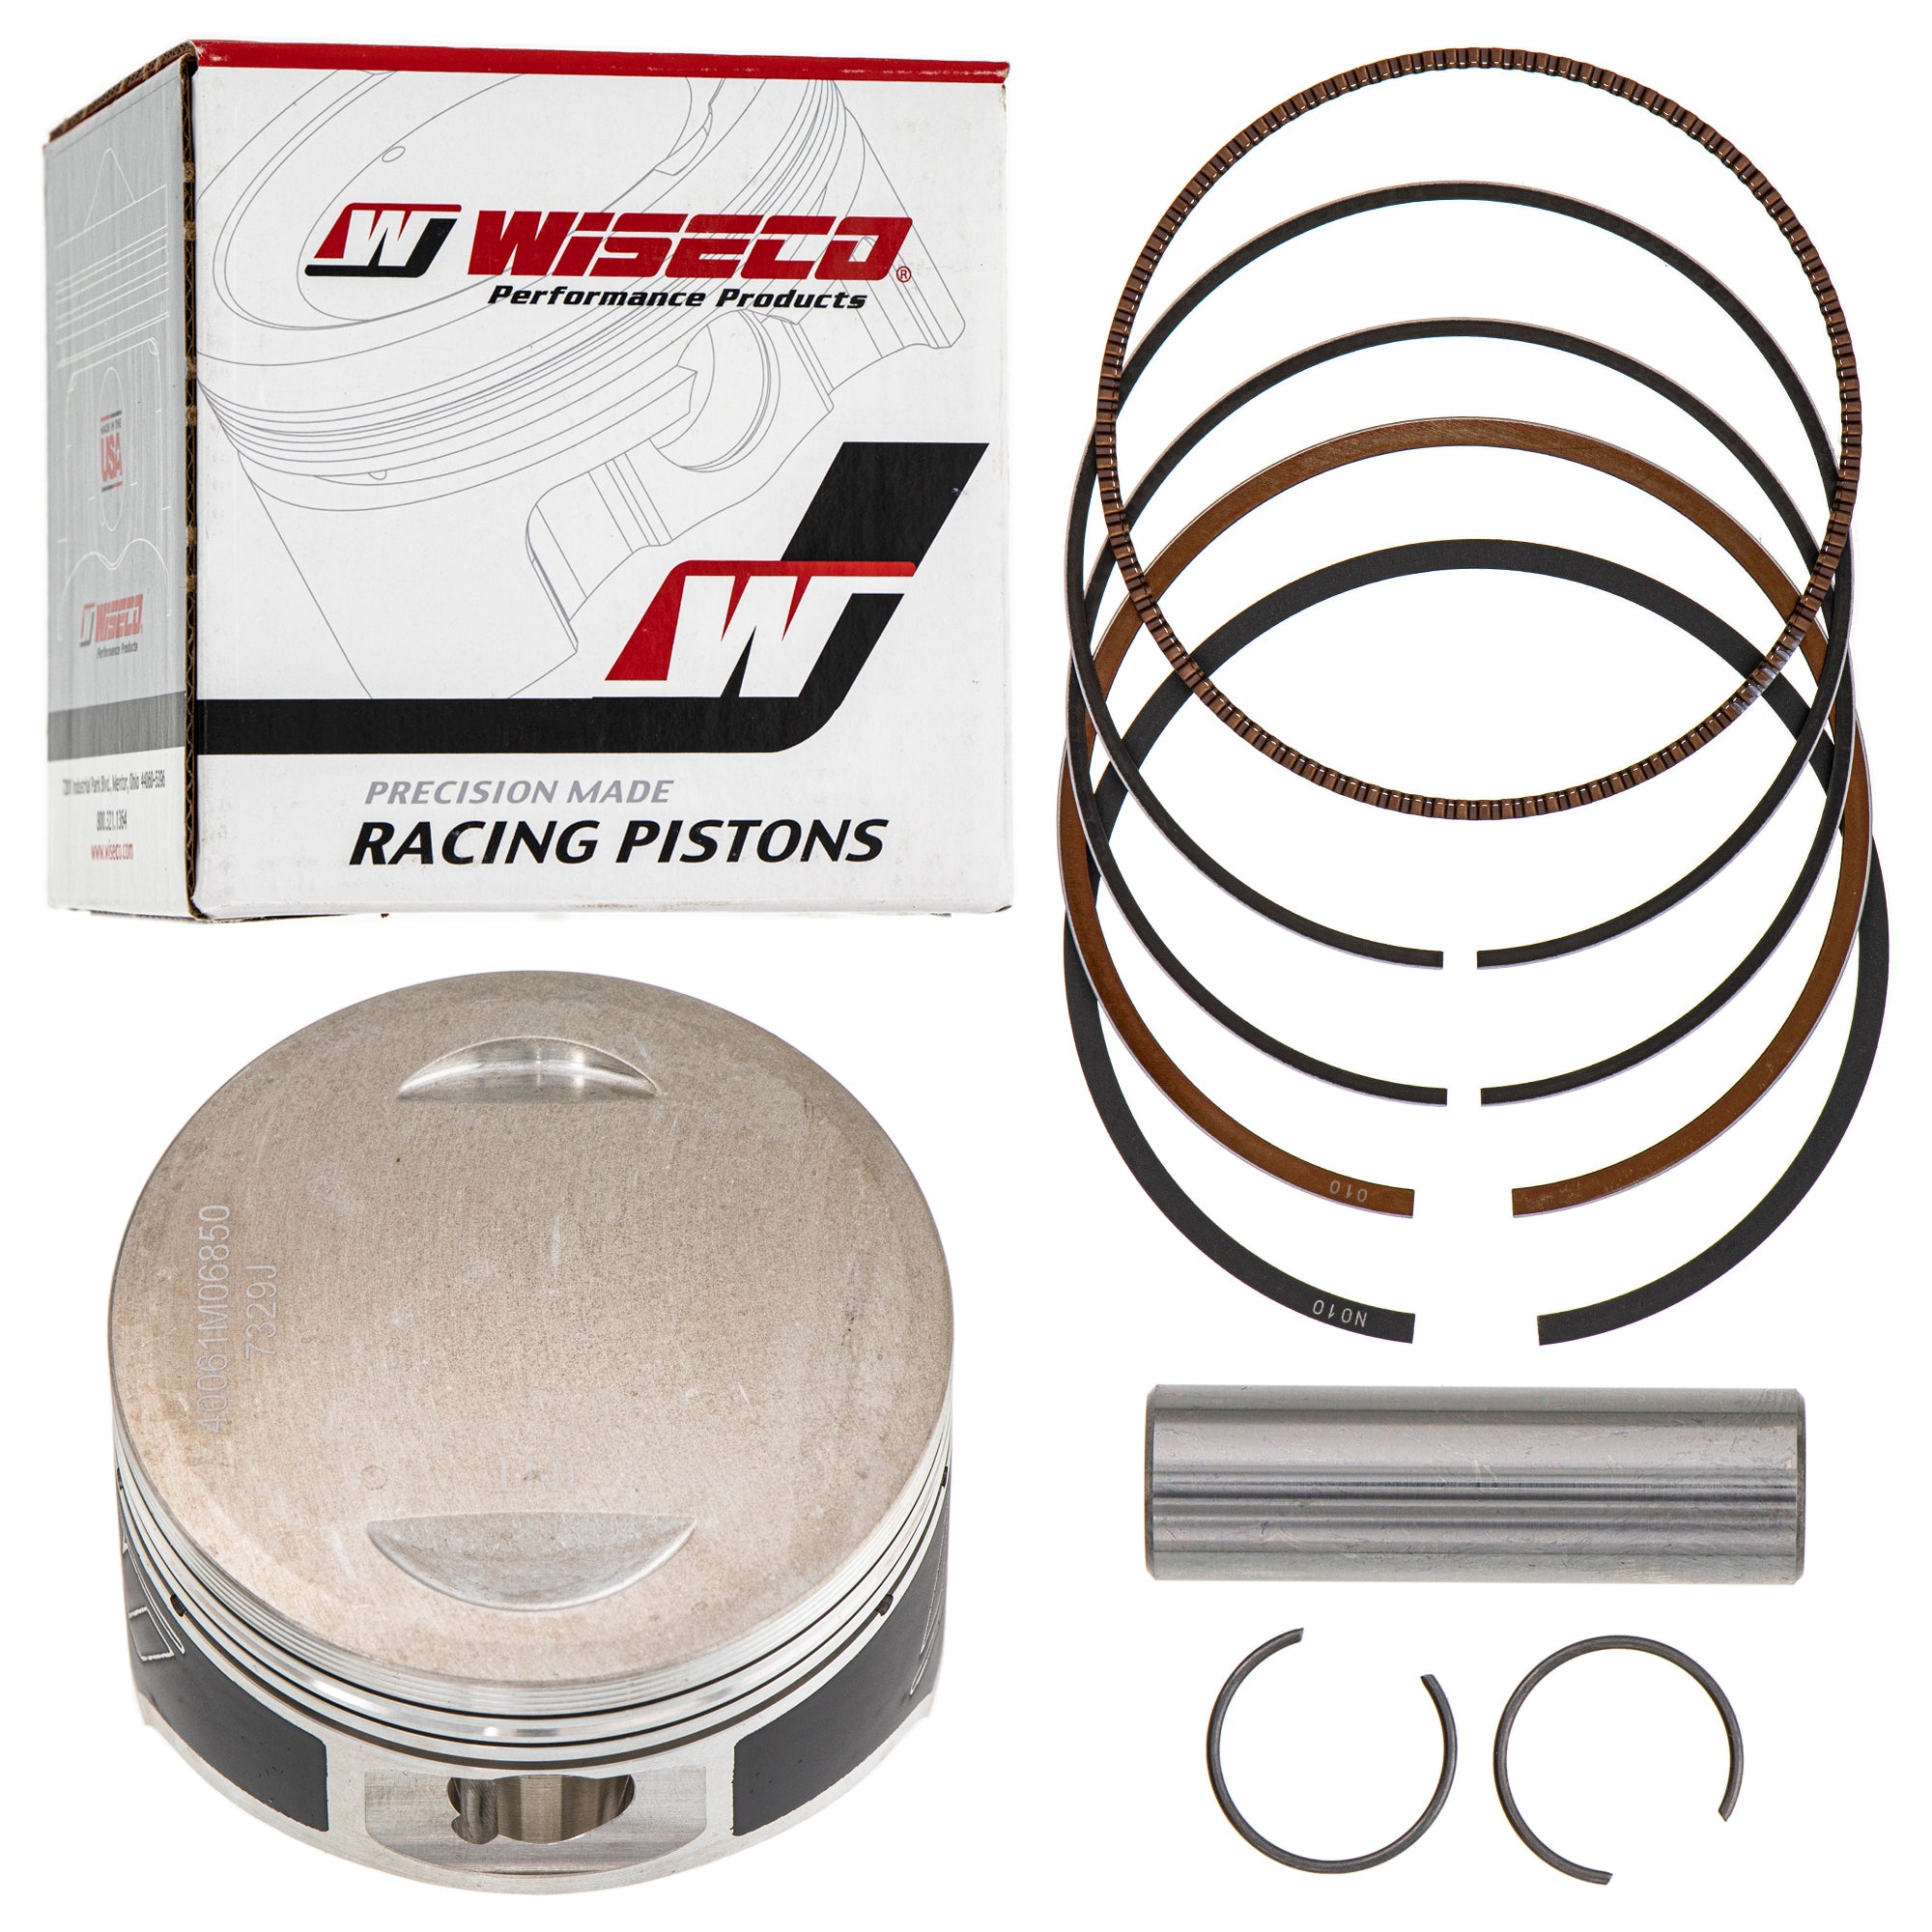 Cylinder Wiseco Piston Gasket Kit for Honda Recon 250 Sportrax 250